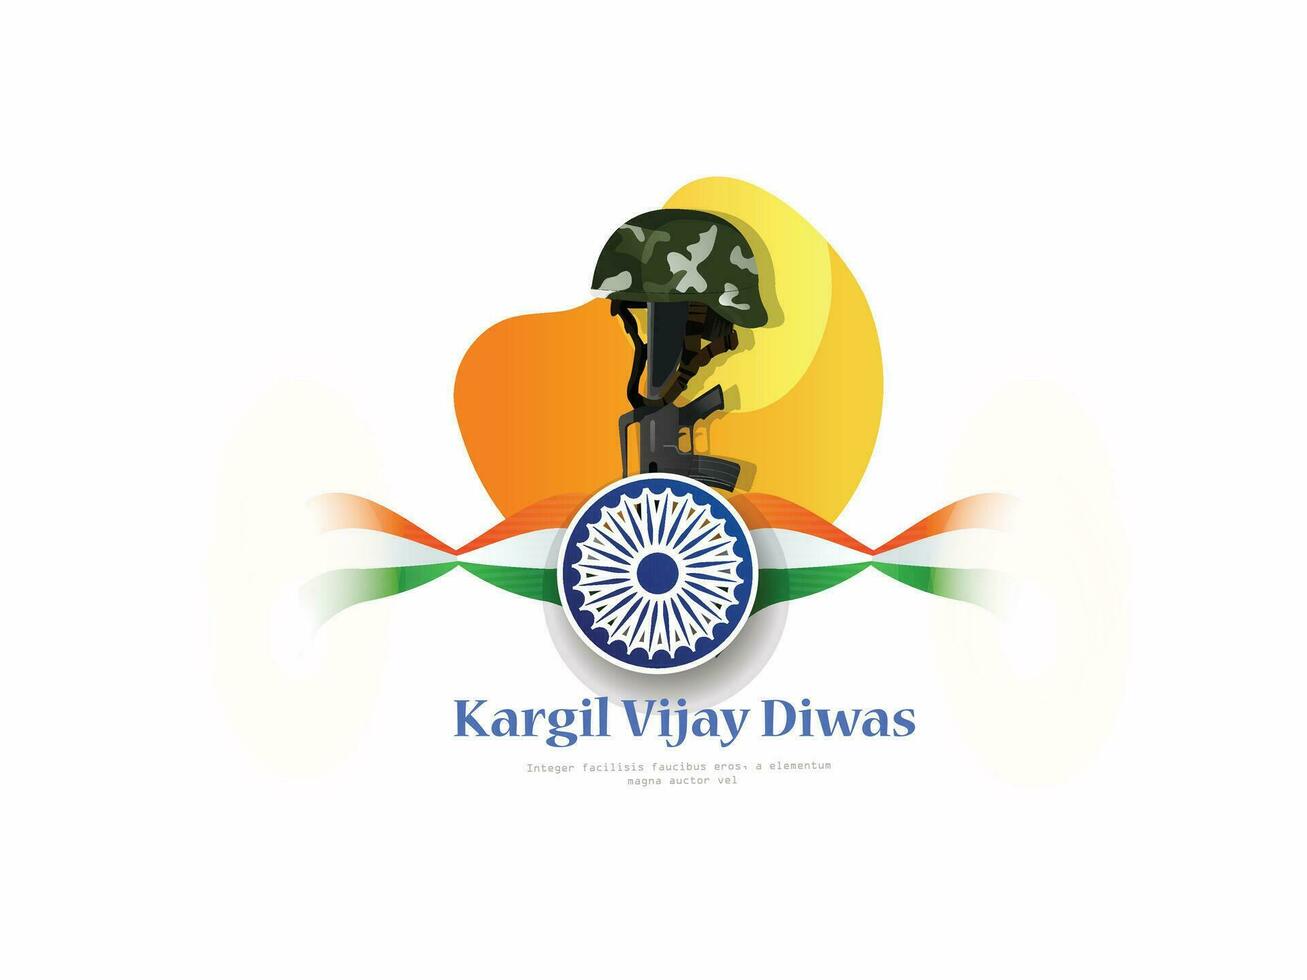 kargil vijay diwas. People remembring and celebrating victory day of indian army vector